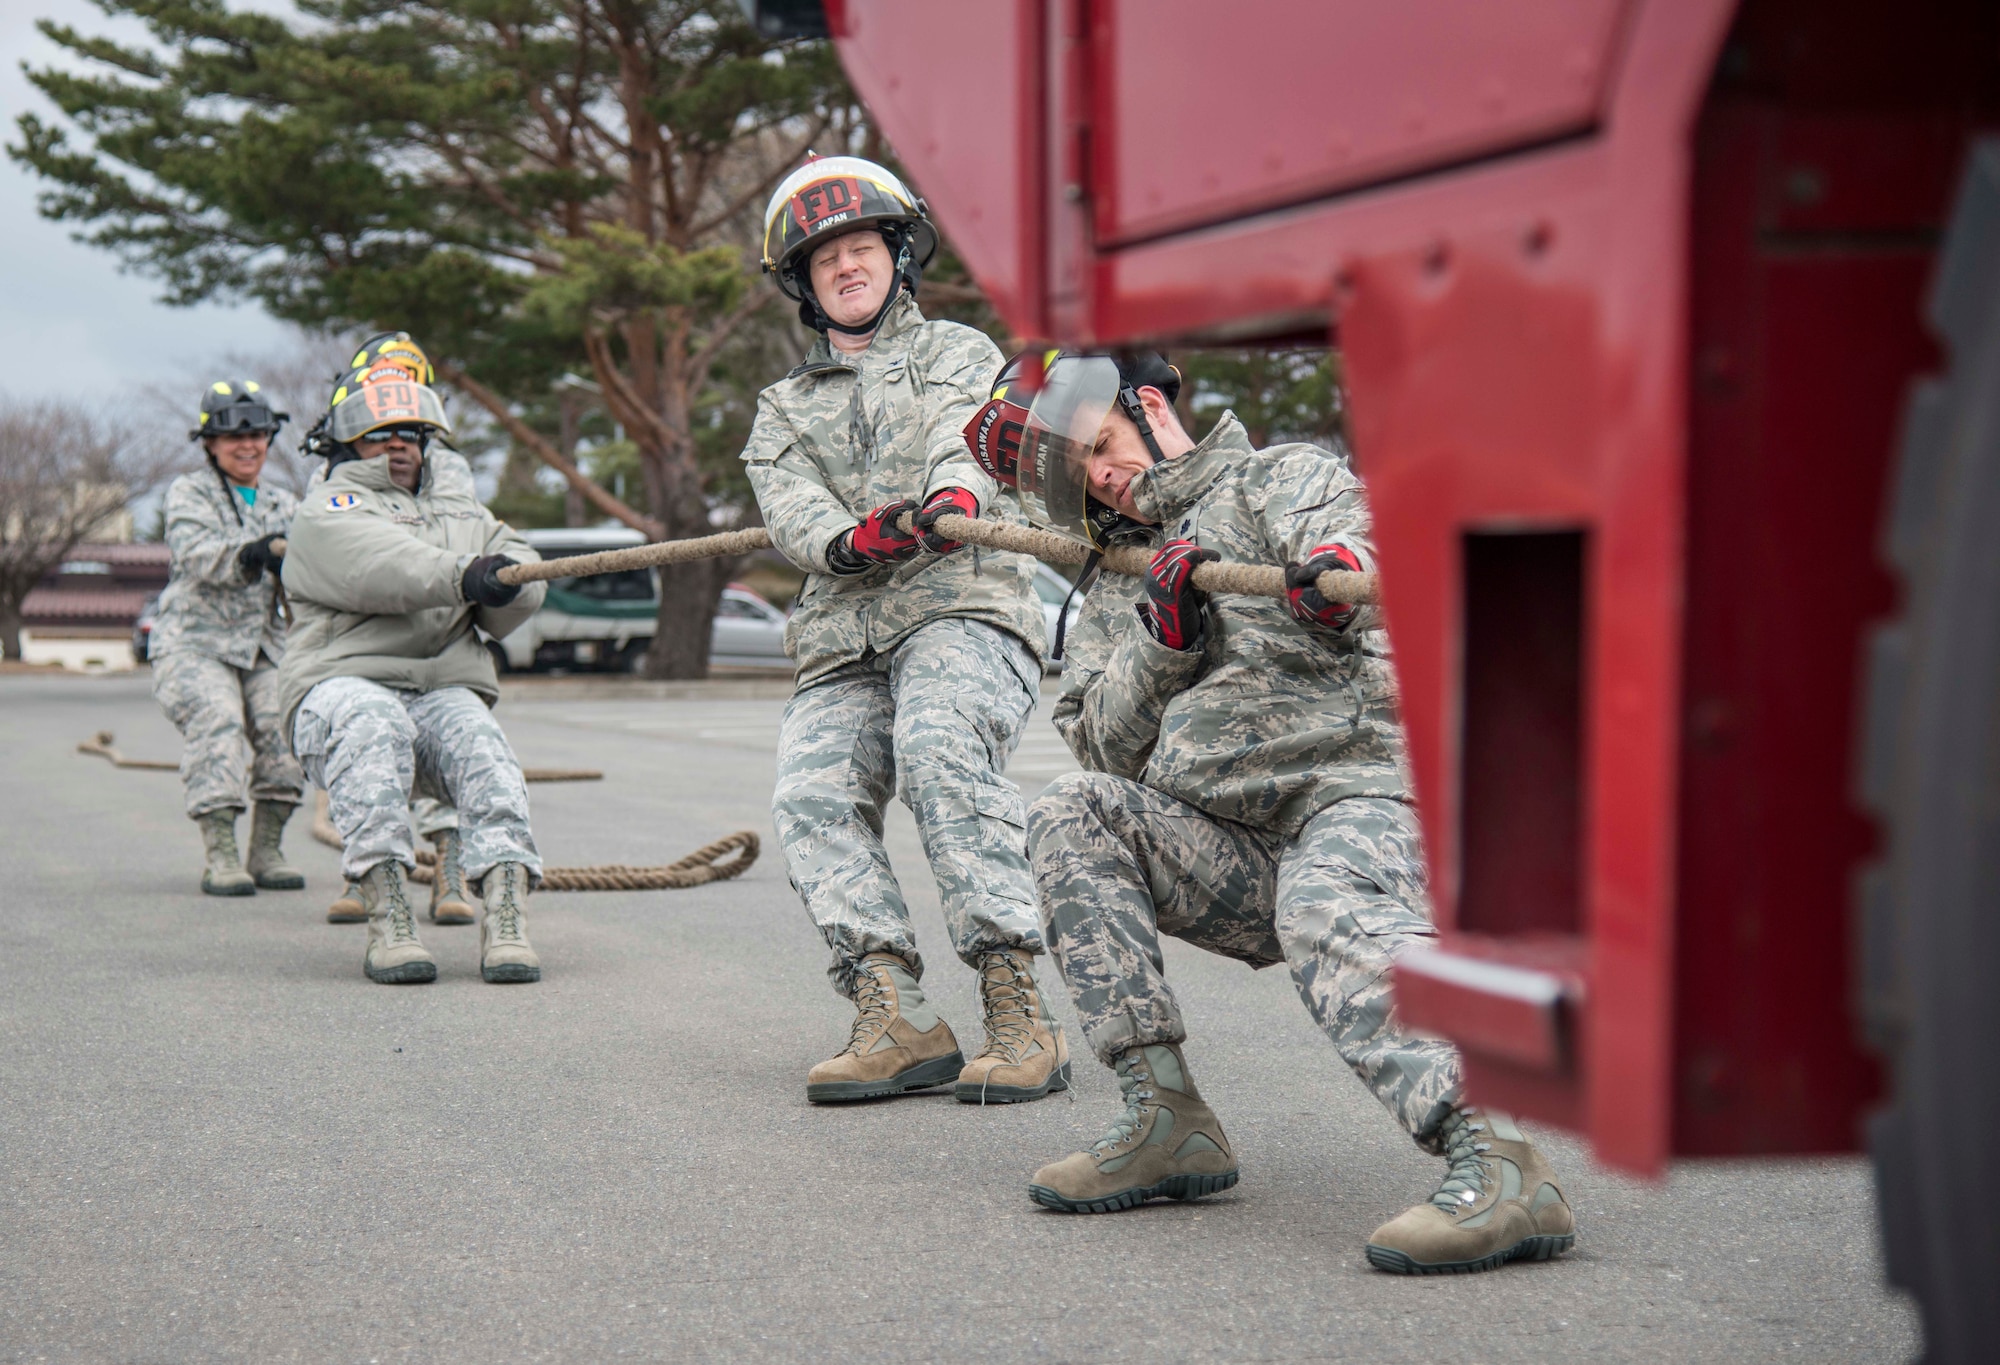 Team Fighter Wing Leadership pulls a firetruck during Wingman Day at Misawa Air Base, Japan, March 31, 2017. Wingman Day encompassed multiple events throughout the day, including a firetruck pull where teams raced against the clock in hopes of getting the fastest time. (U.S. Air Force Senior Airman Brittany A. Chase)